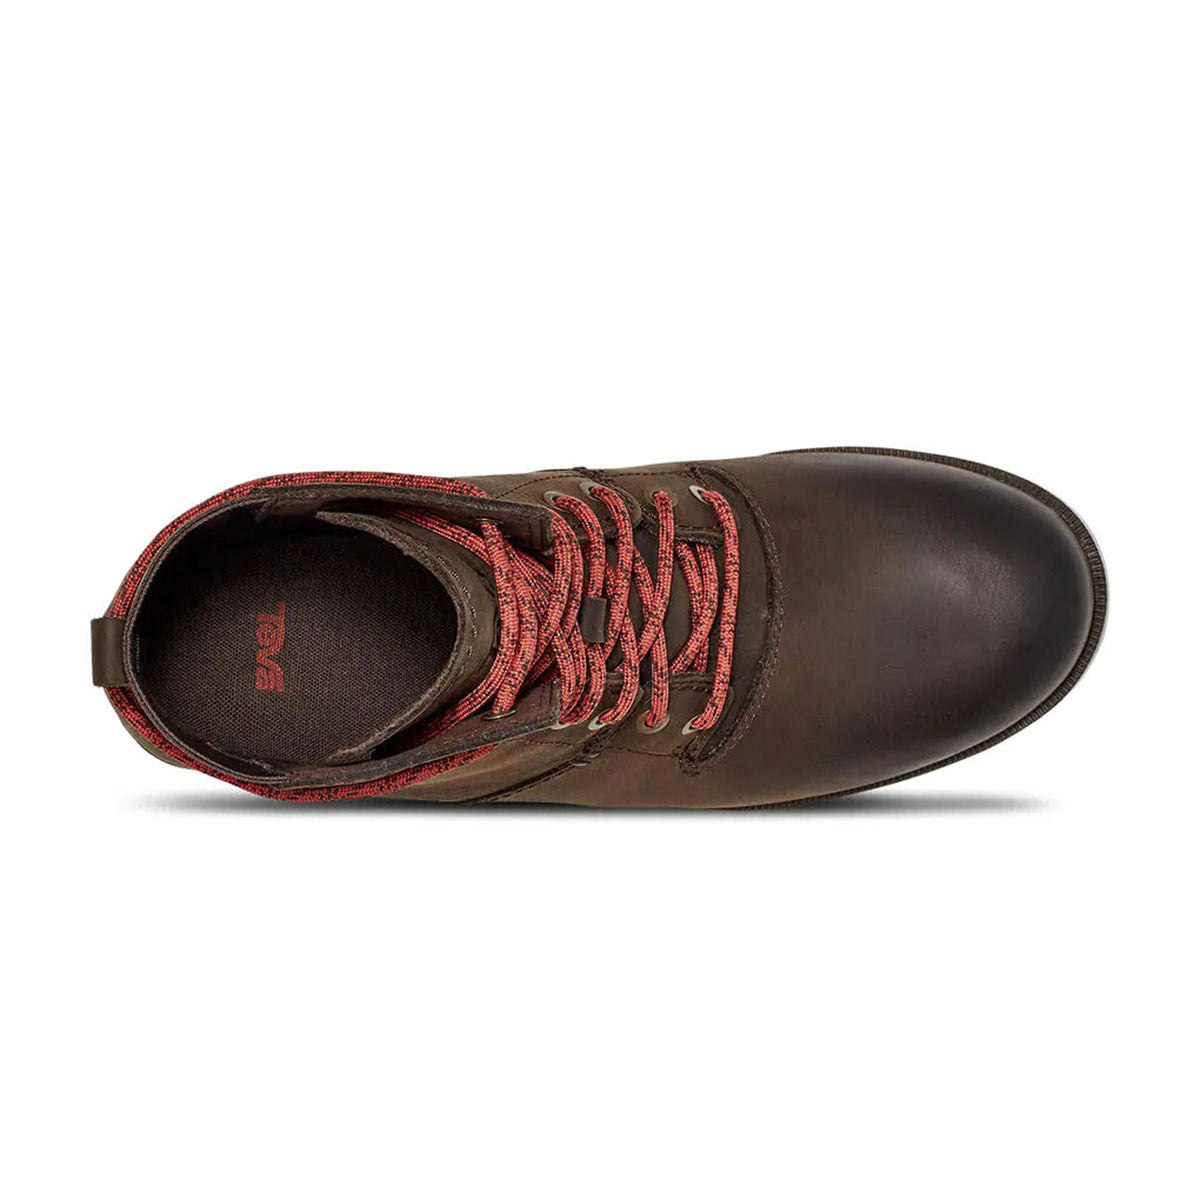 Single brown waterproof leather shoe with red laces viewed from above, Teva Anaya Lace Up Chocolate- Womens.